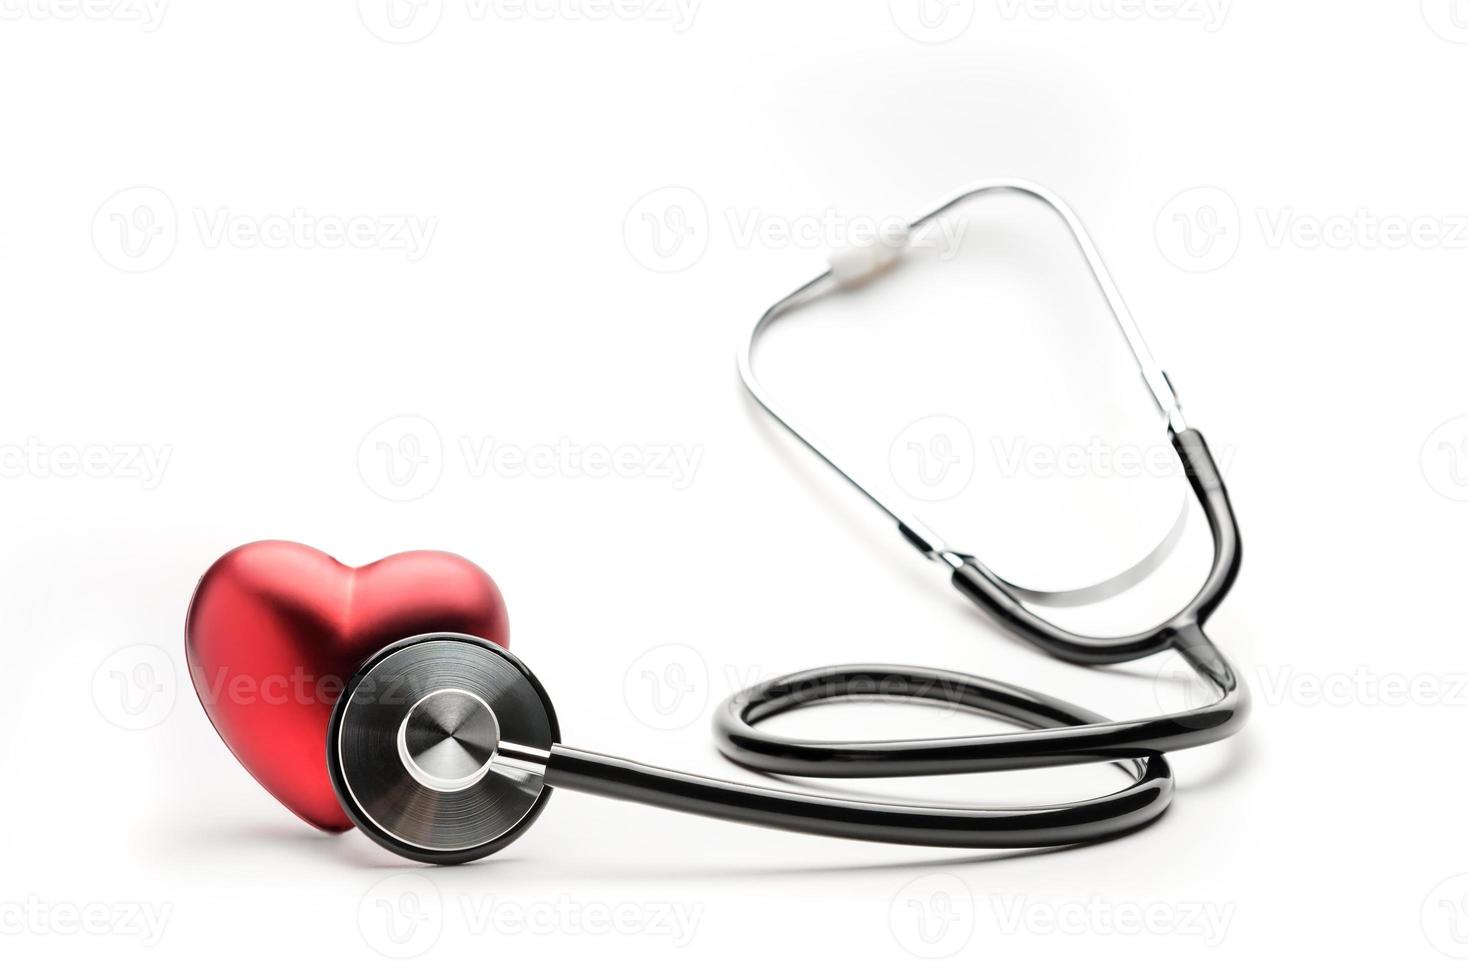 A stethoscope listens to a red heart photo